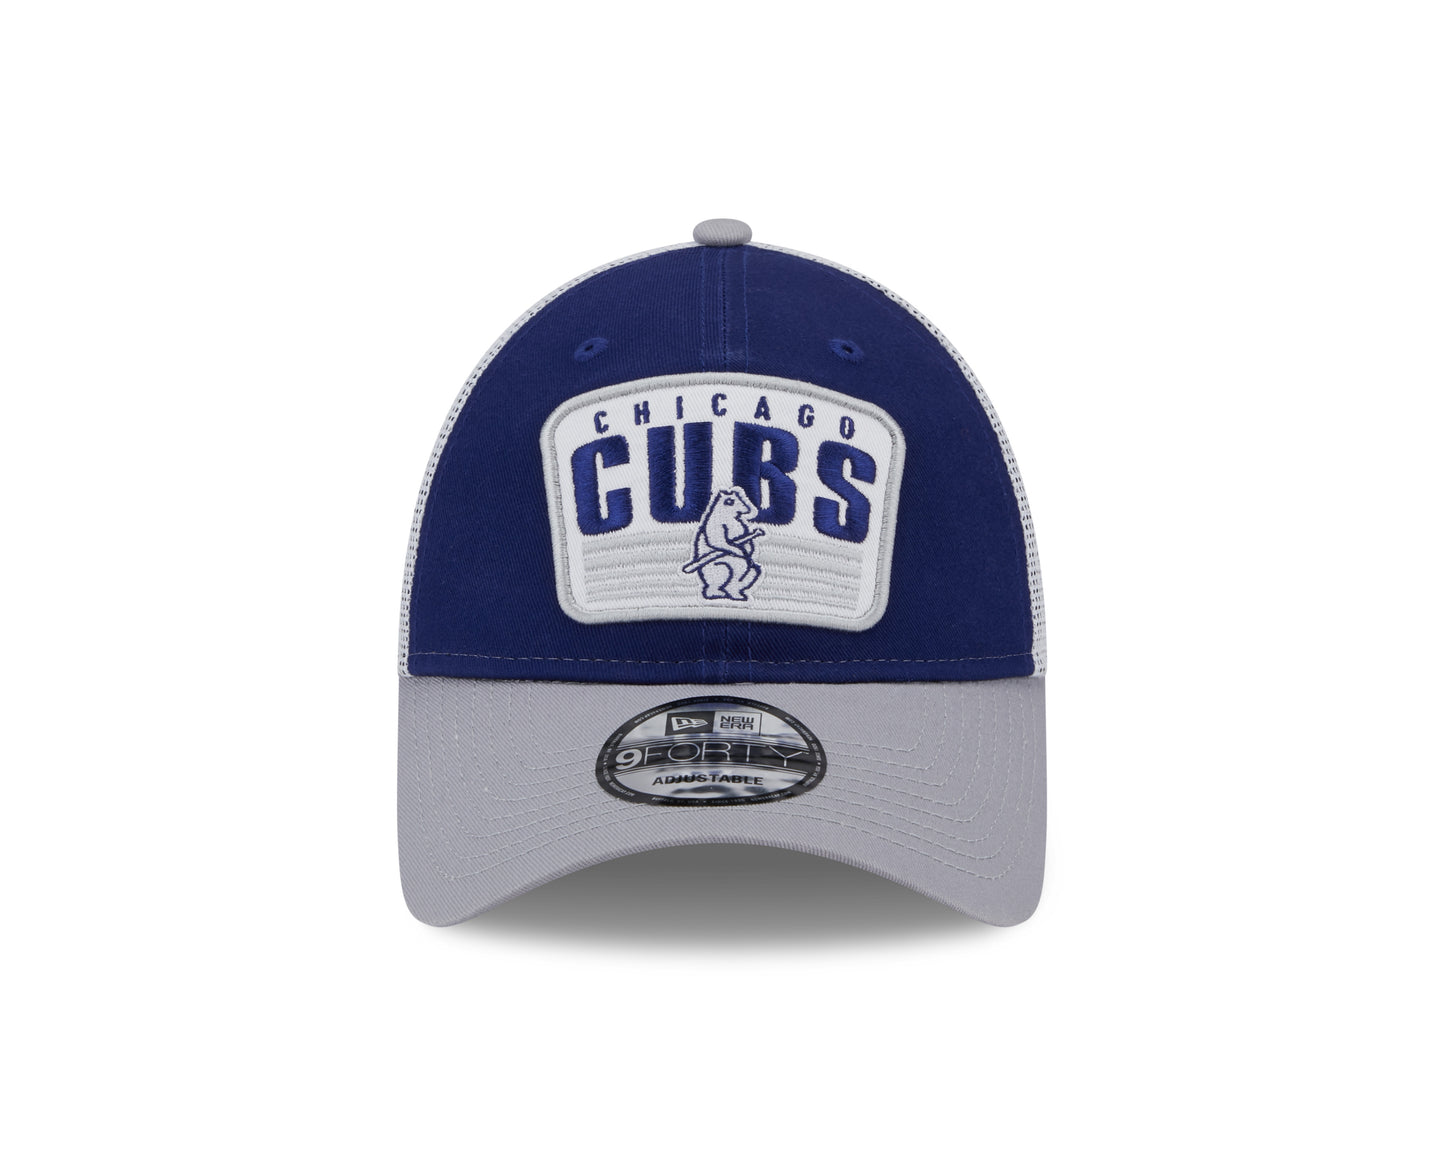 Chicago Cubs Cooperstown 1914 New Era 2 Tone Royal/Gray Patch Trucker 9FORTY Adjustable Hat